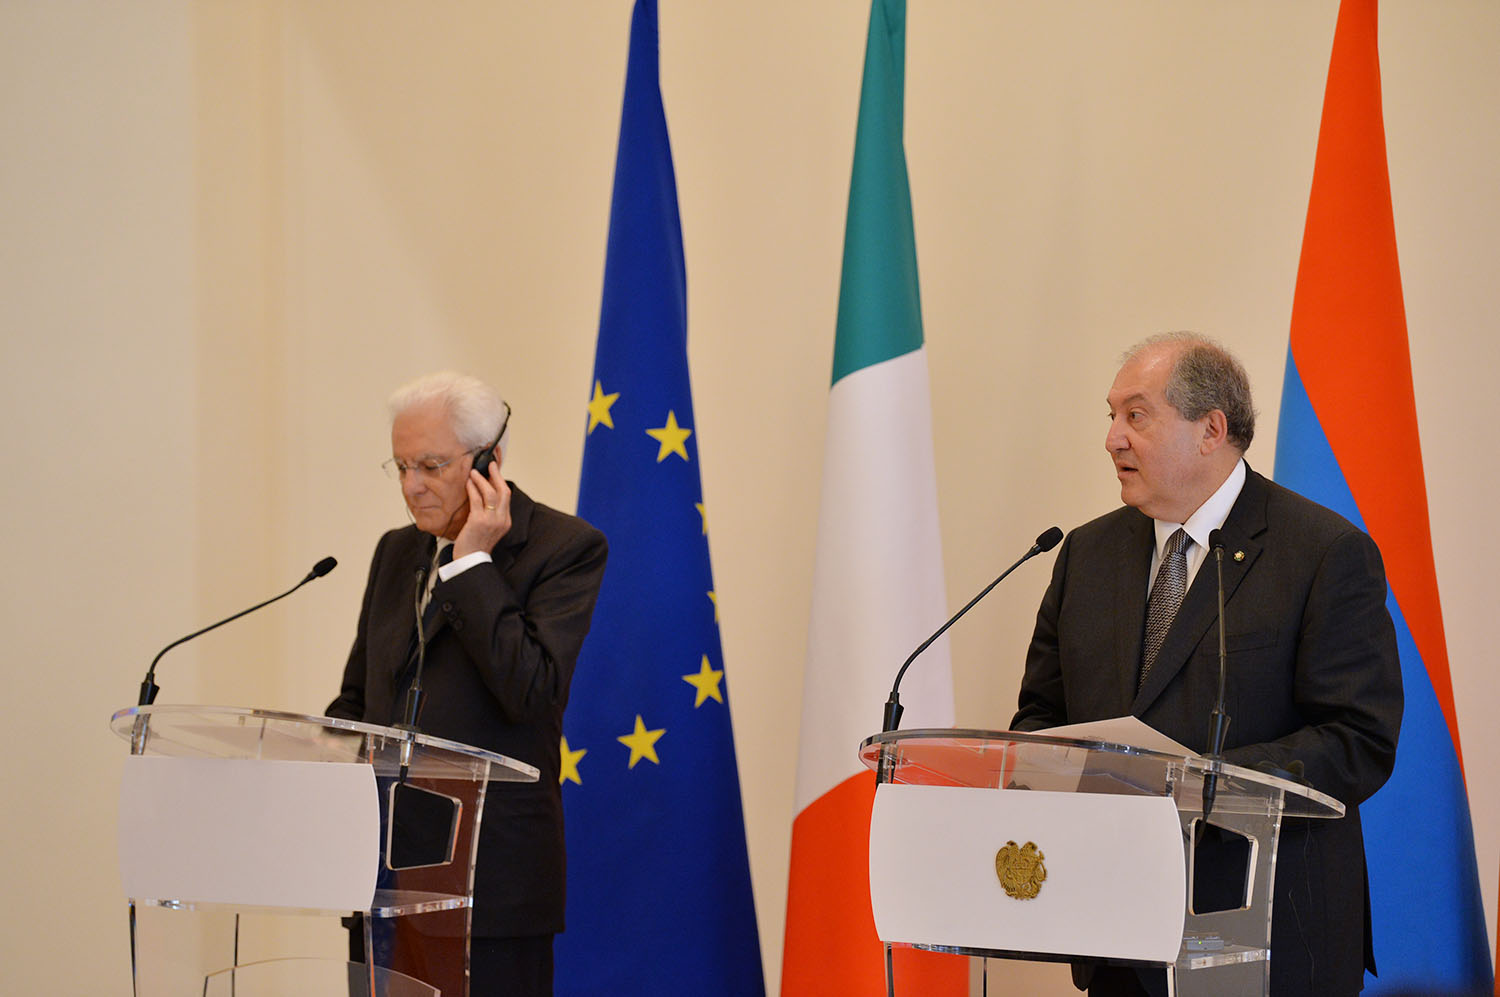 Presidents of Armenia and Italy made statements for the press